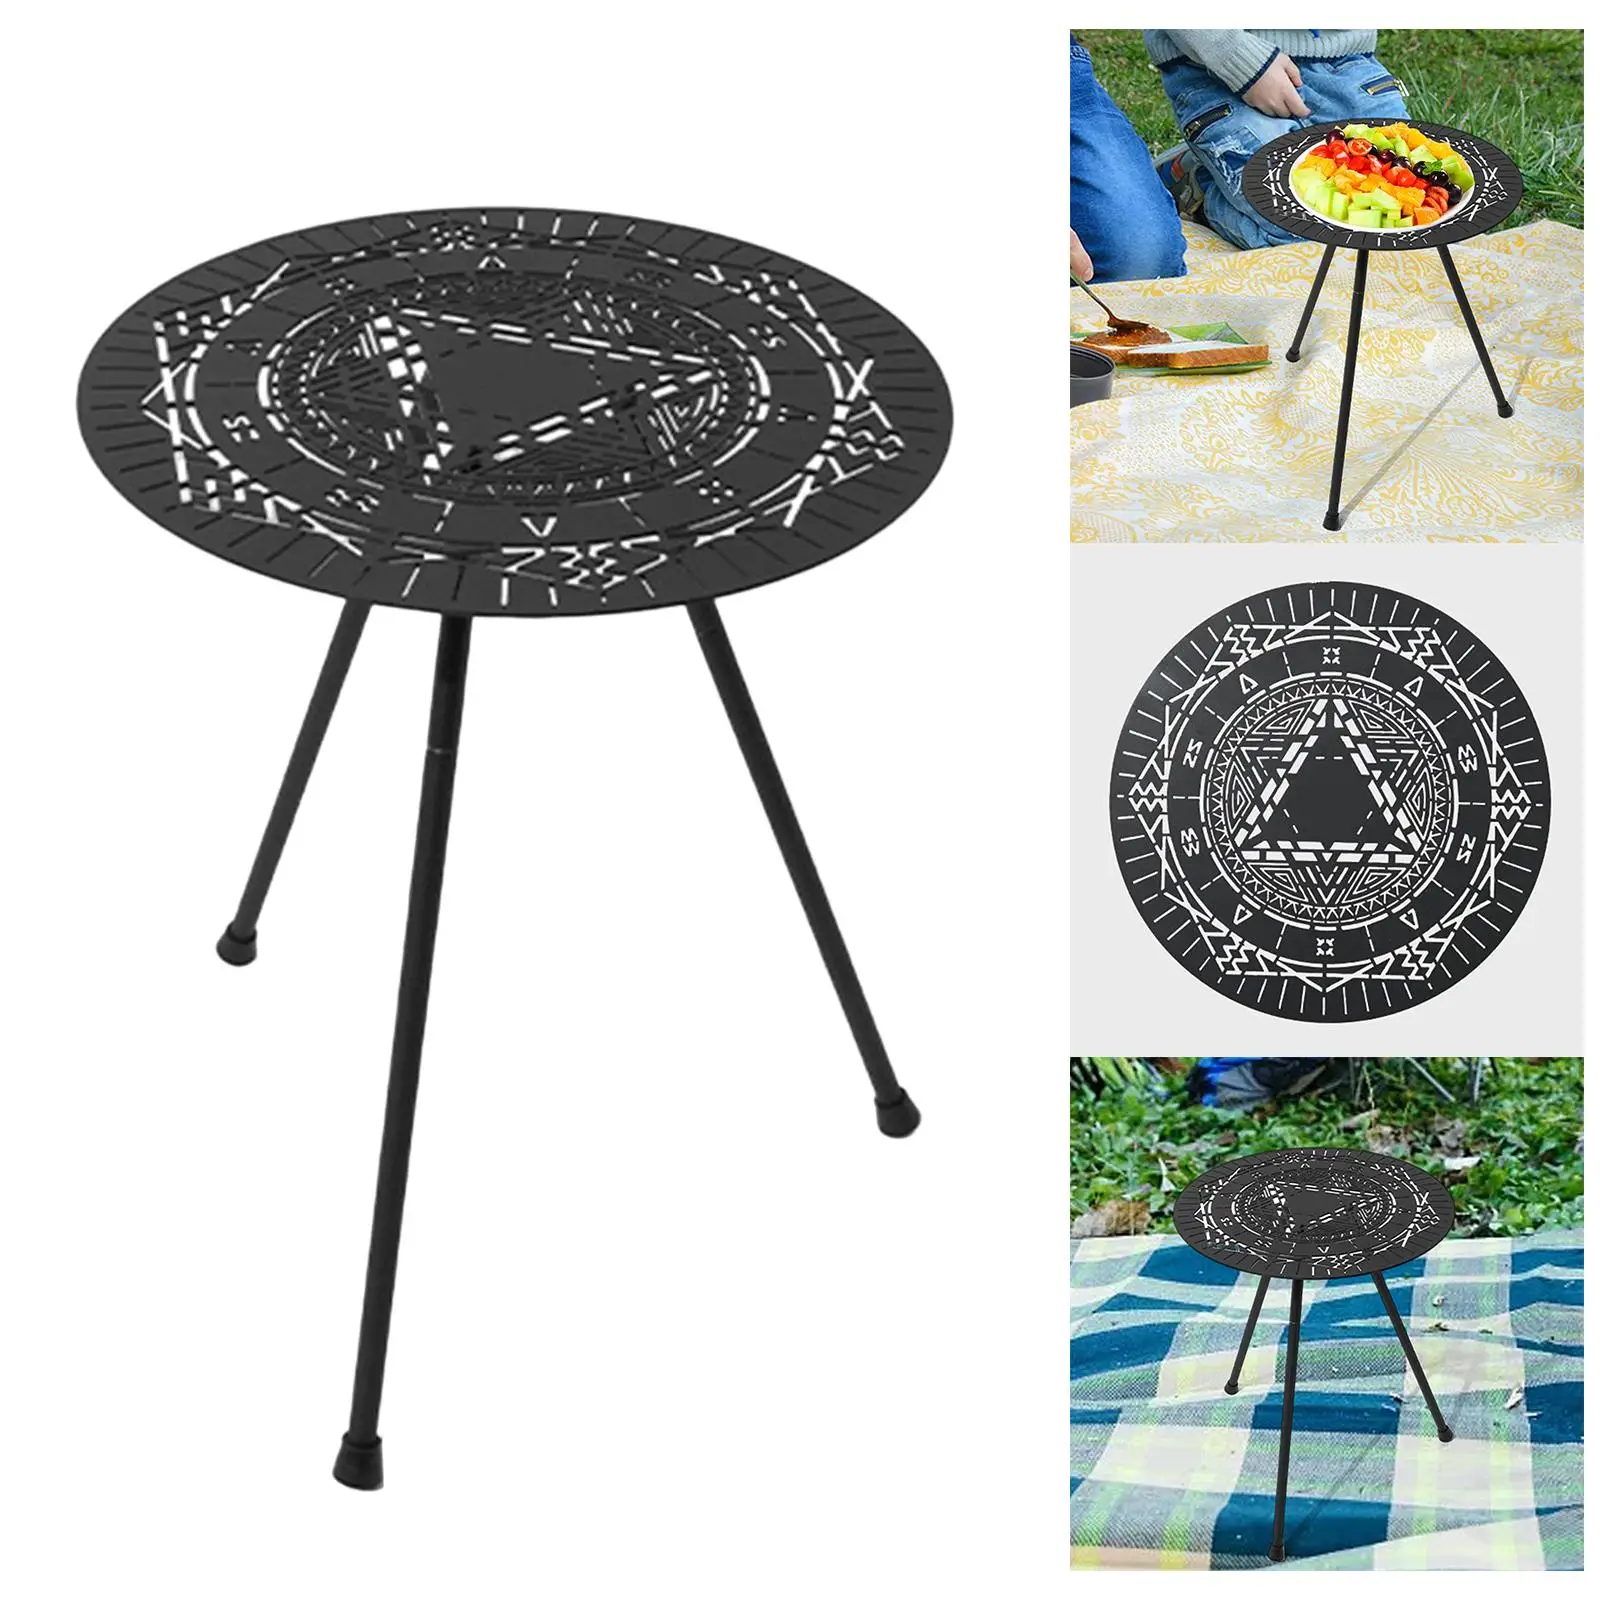 Portable Camping Coffee Table Foldable Adjustable Camping Furniture for Picnic Patio BBQ Fishing